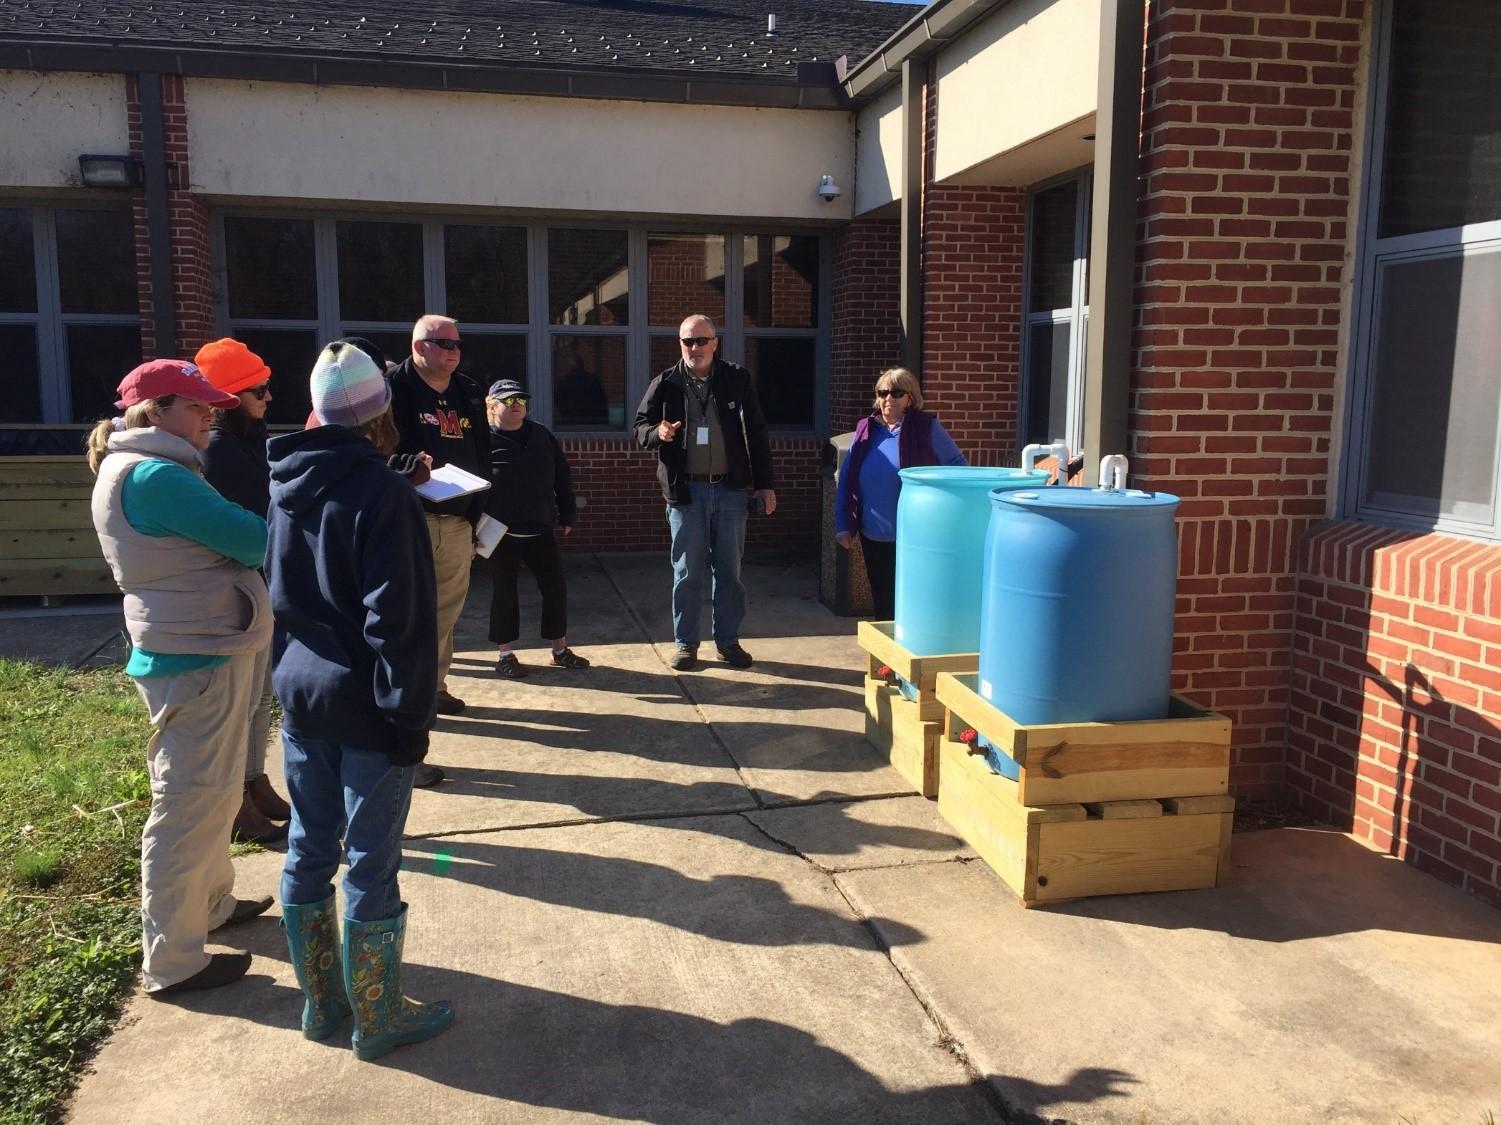 Linda has always been fascinated by the “why” of many things and is seen here inspecting a rain barrel hook-up during a WSA class tour.